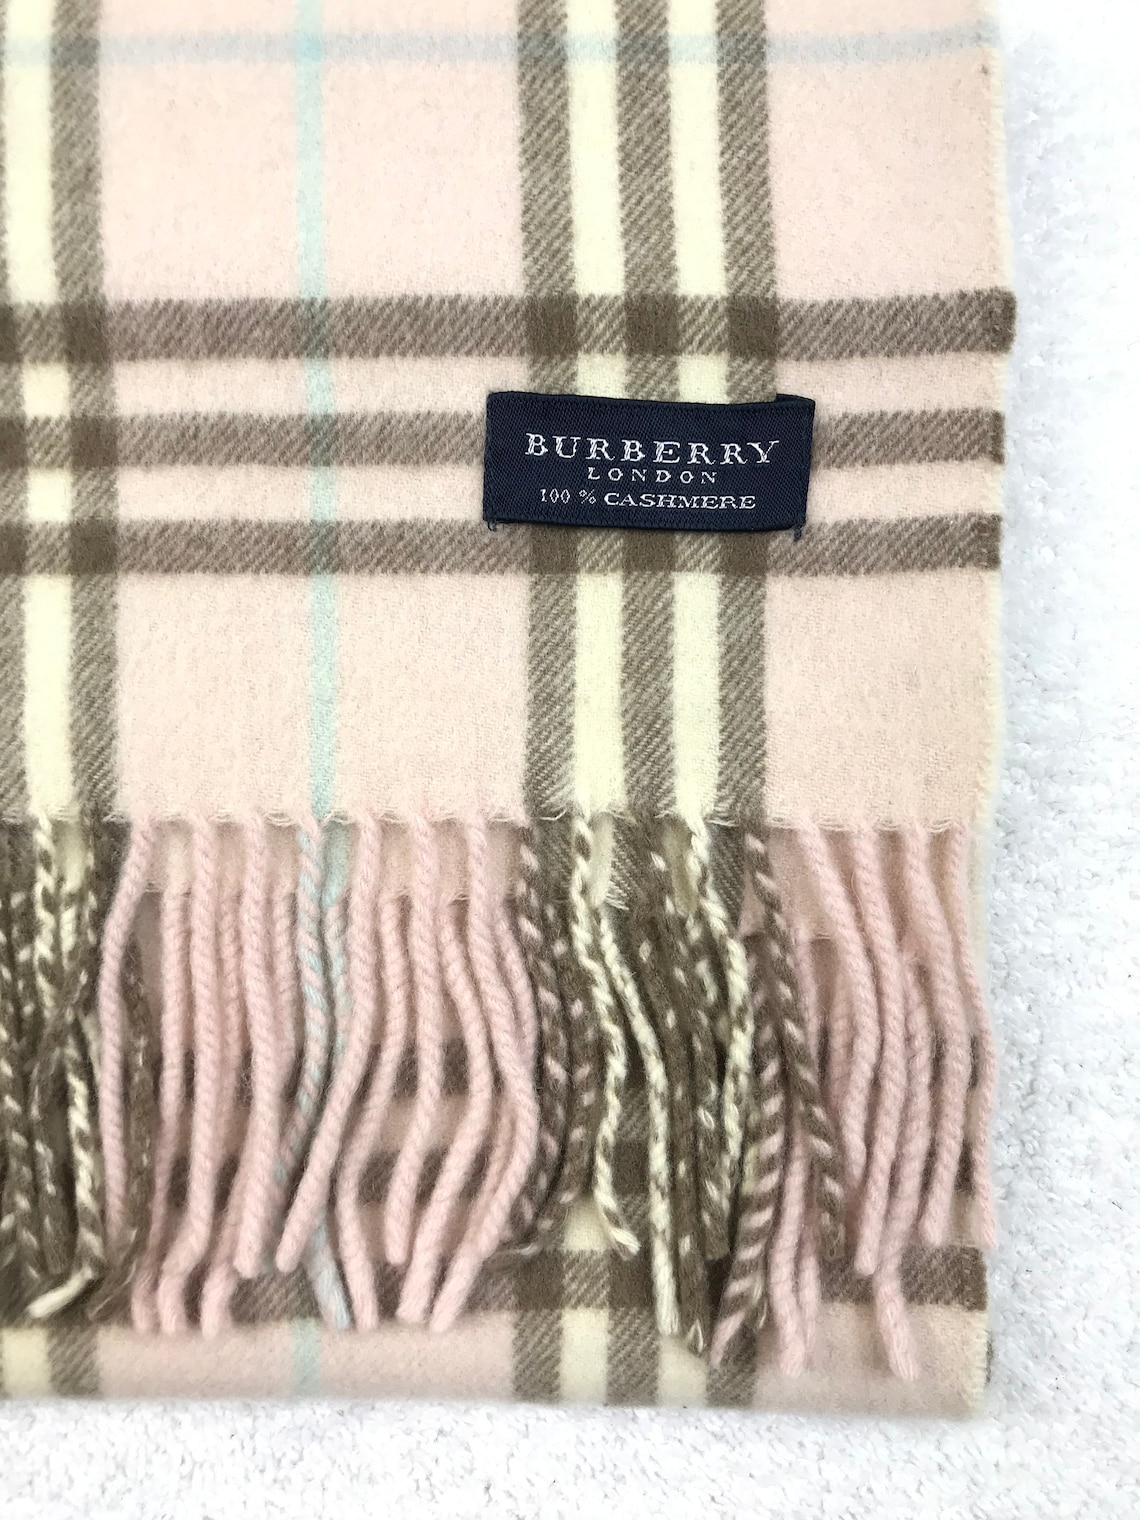 Authentic Burberry scarf muffler scarves soft pink / Cream | Etsy